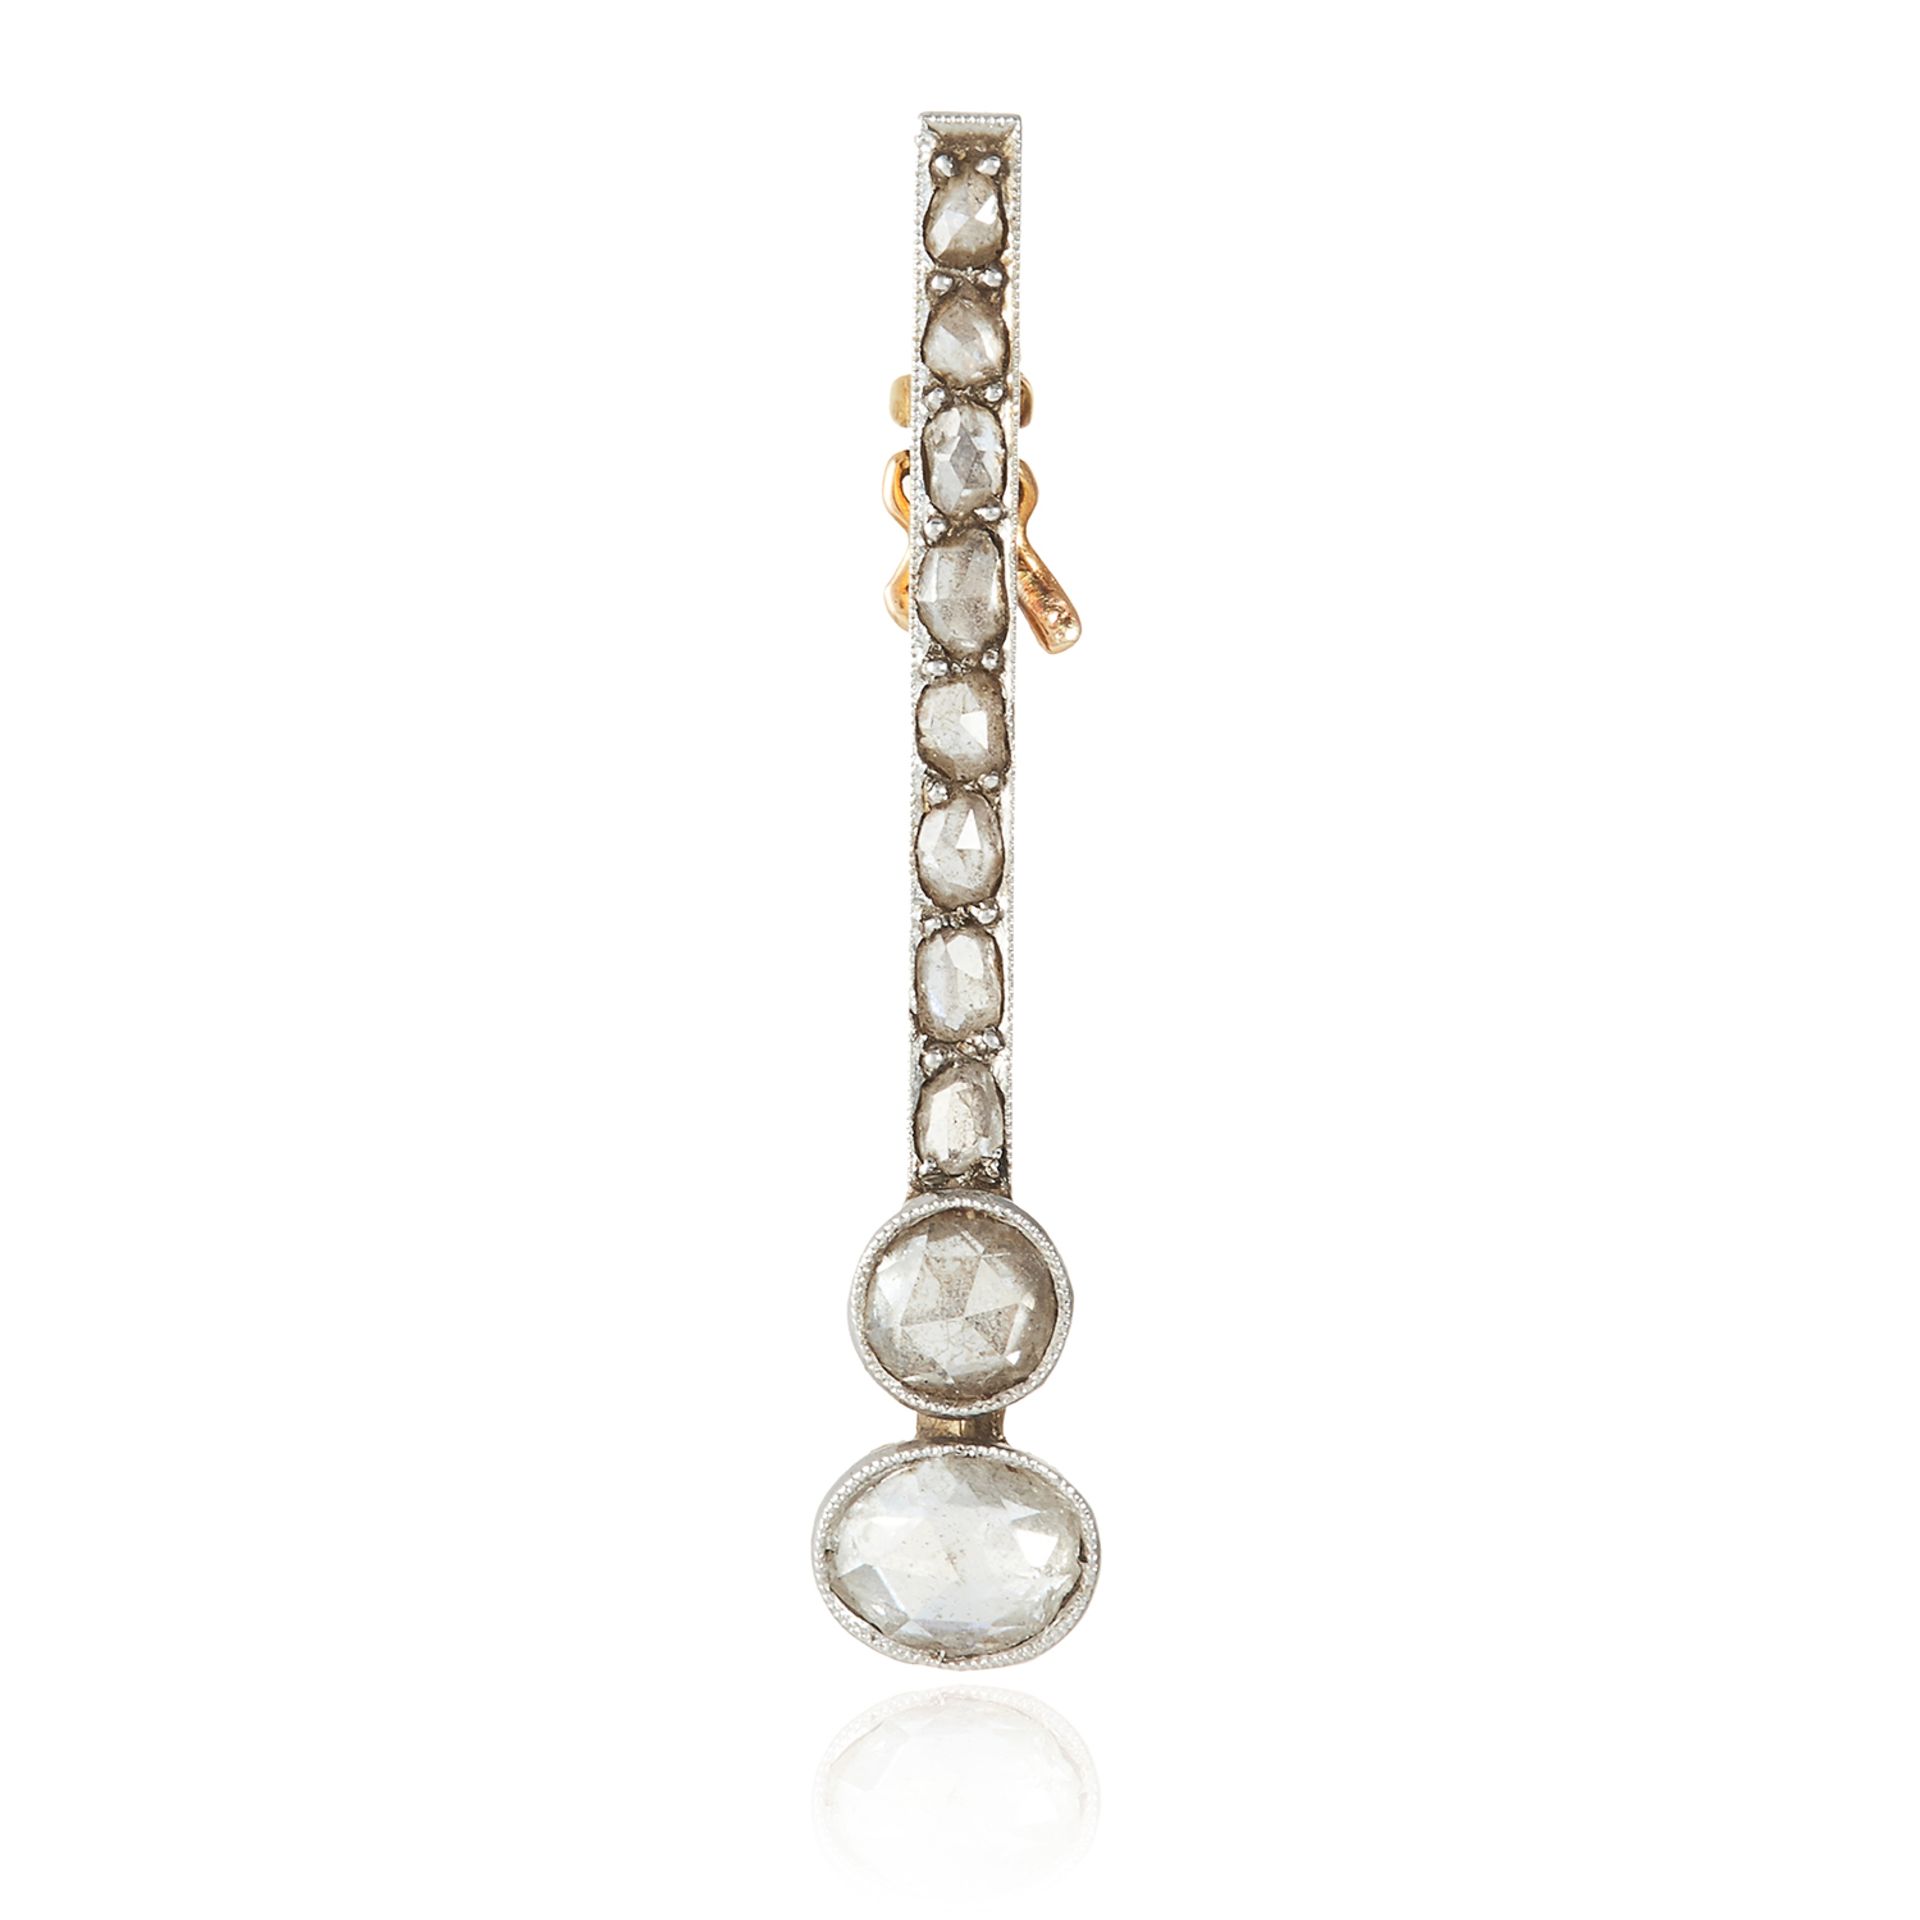 AN ART DECO DIAMOND PENDANT in yellow gold and silver, jewelled with rose cut diamonds, unmarked,